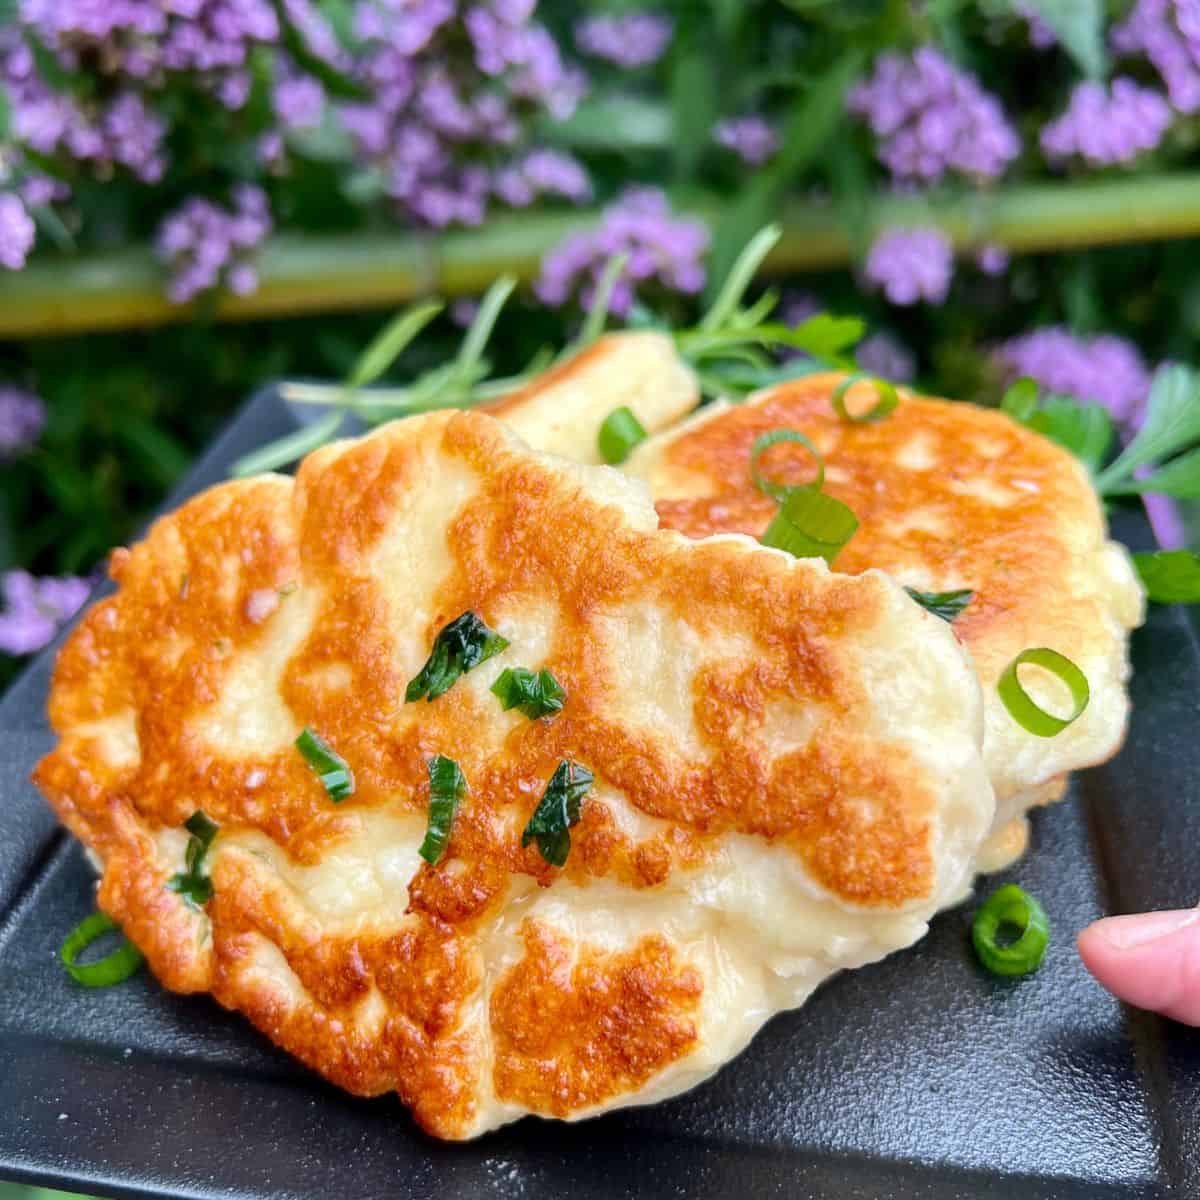 Gluten Free Naan Bread slices on a black plate with chives